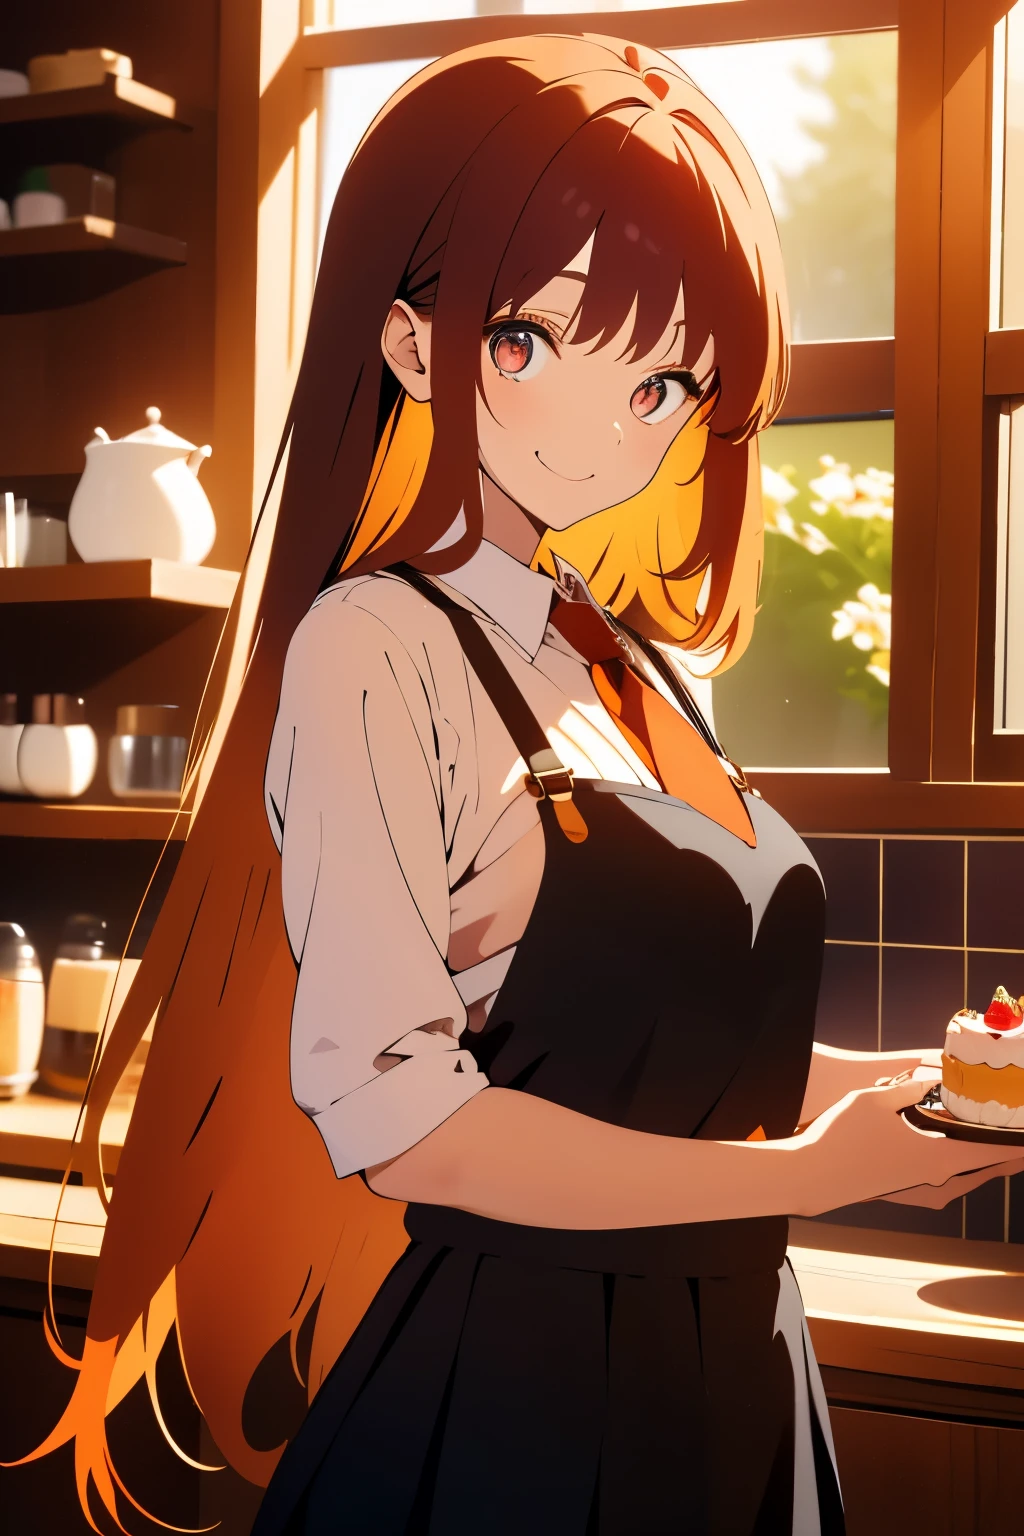 there’s a girl with black shiny eyes and long ALL orange hair with bangs and a ribbon attached to it holding an strawberry cake with a smile. she has a barista uniform and rosy cheeks. she also wears glassen in rectangle shape